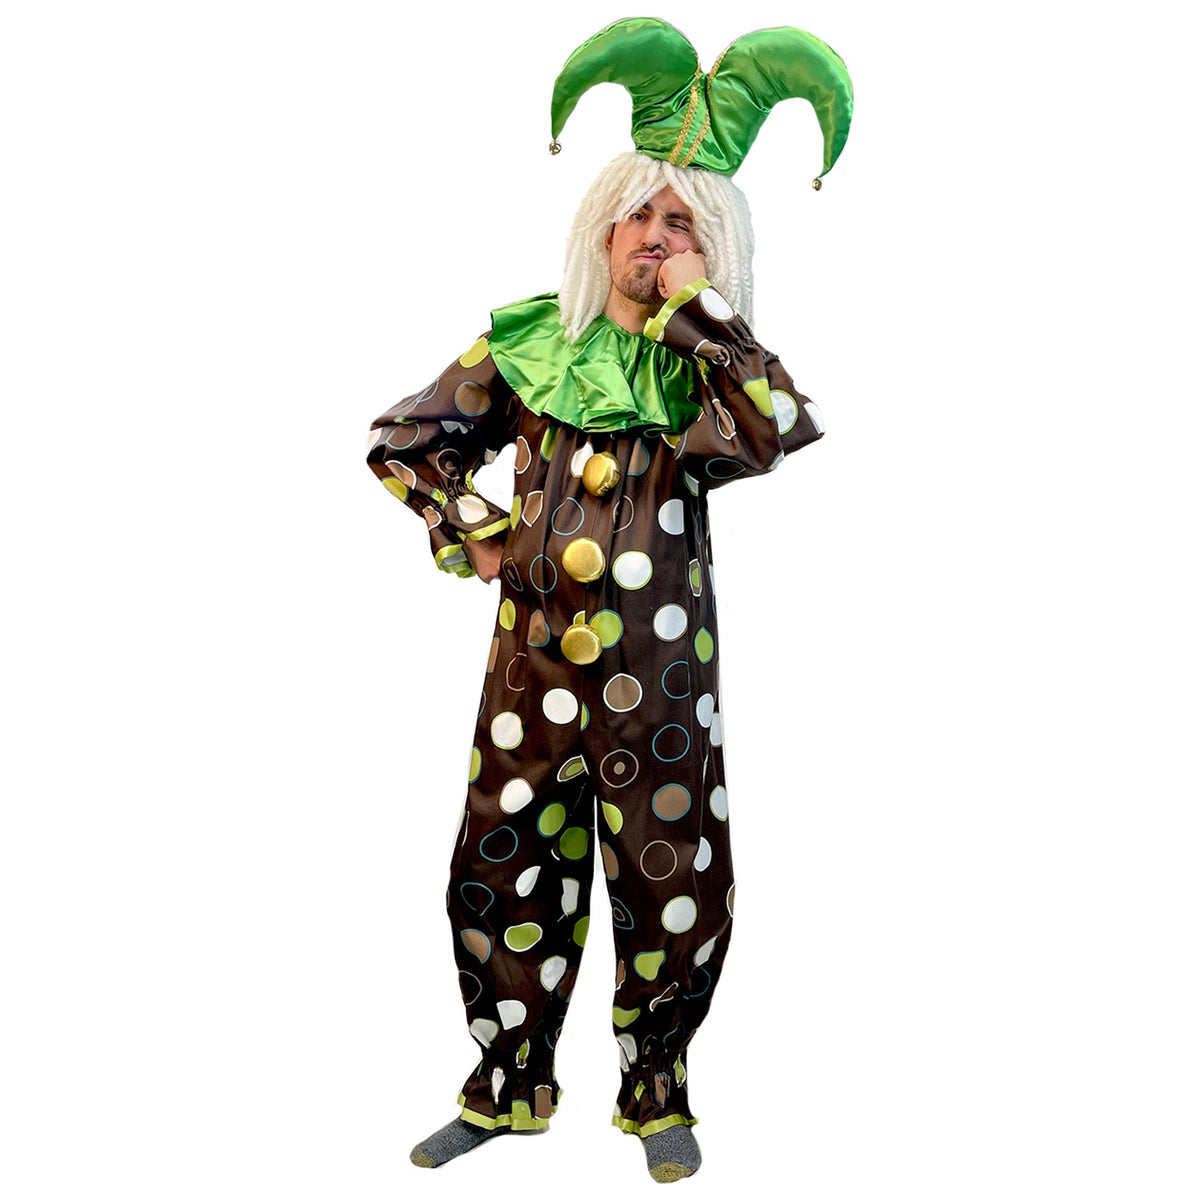 Brown and Green Polka Dot Clown Costume w/ Ruffle Collar and Jester Clown Hat